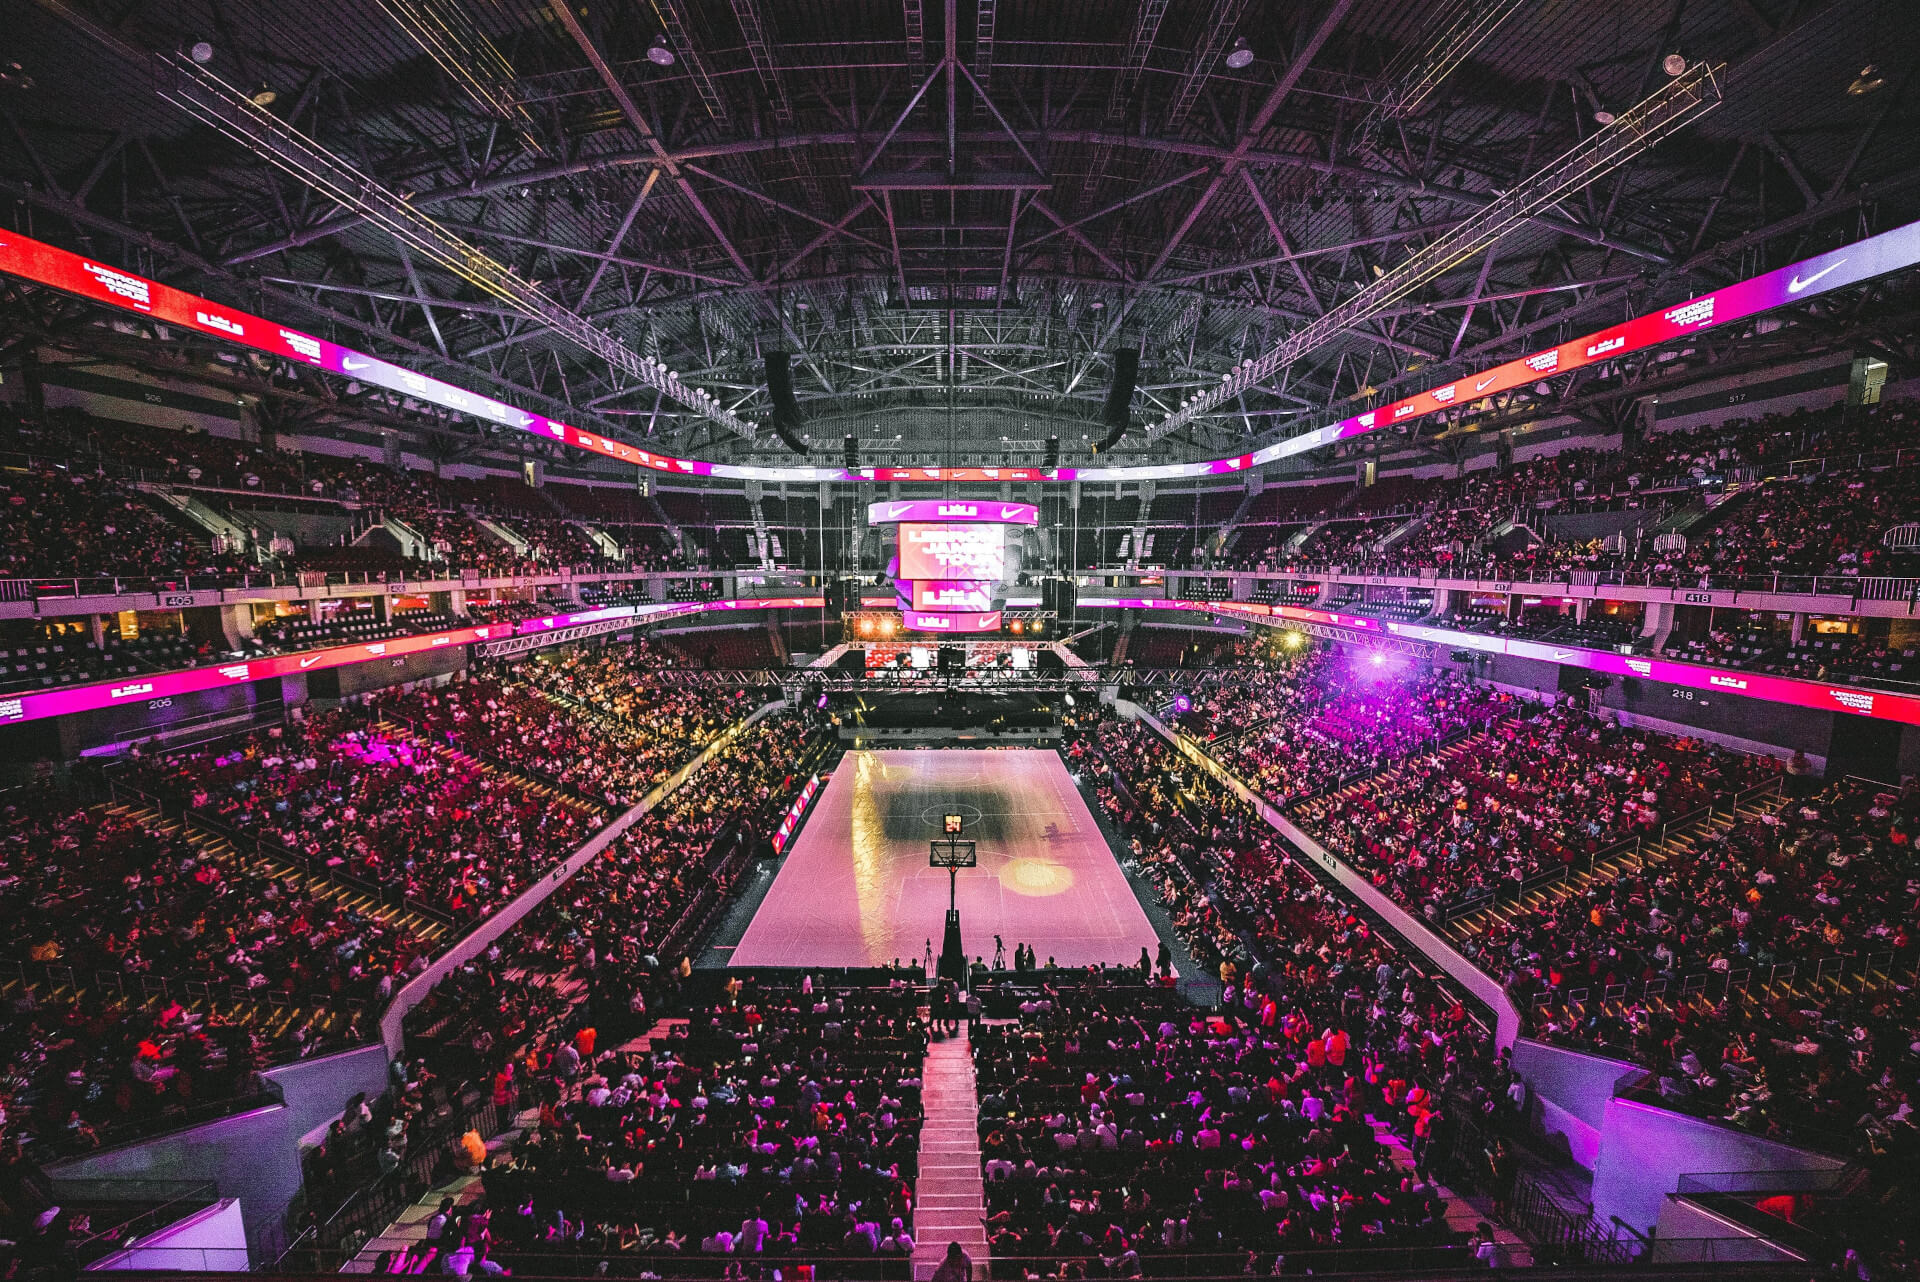 From ice to concert stage to basketball court, T-Mobile Arena is